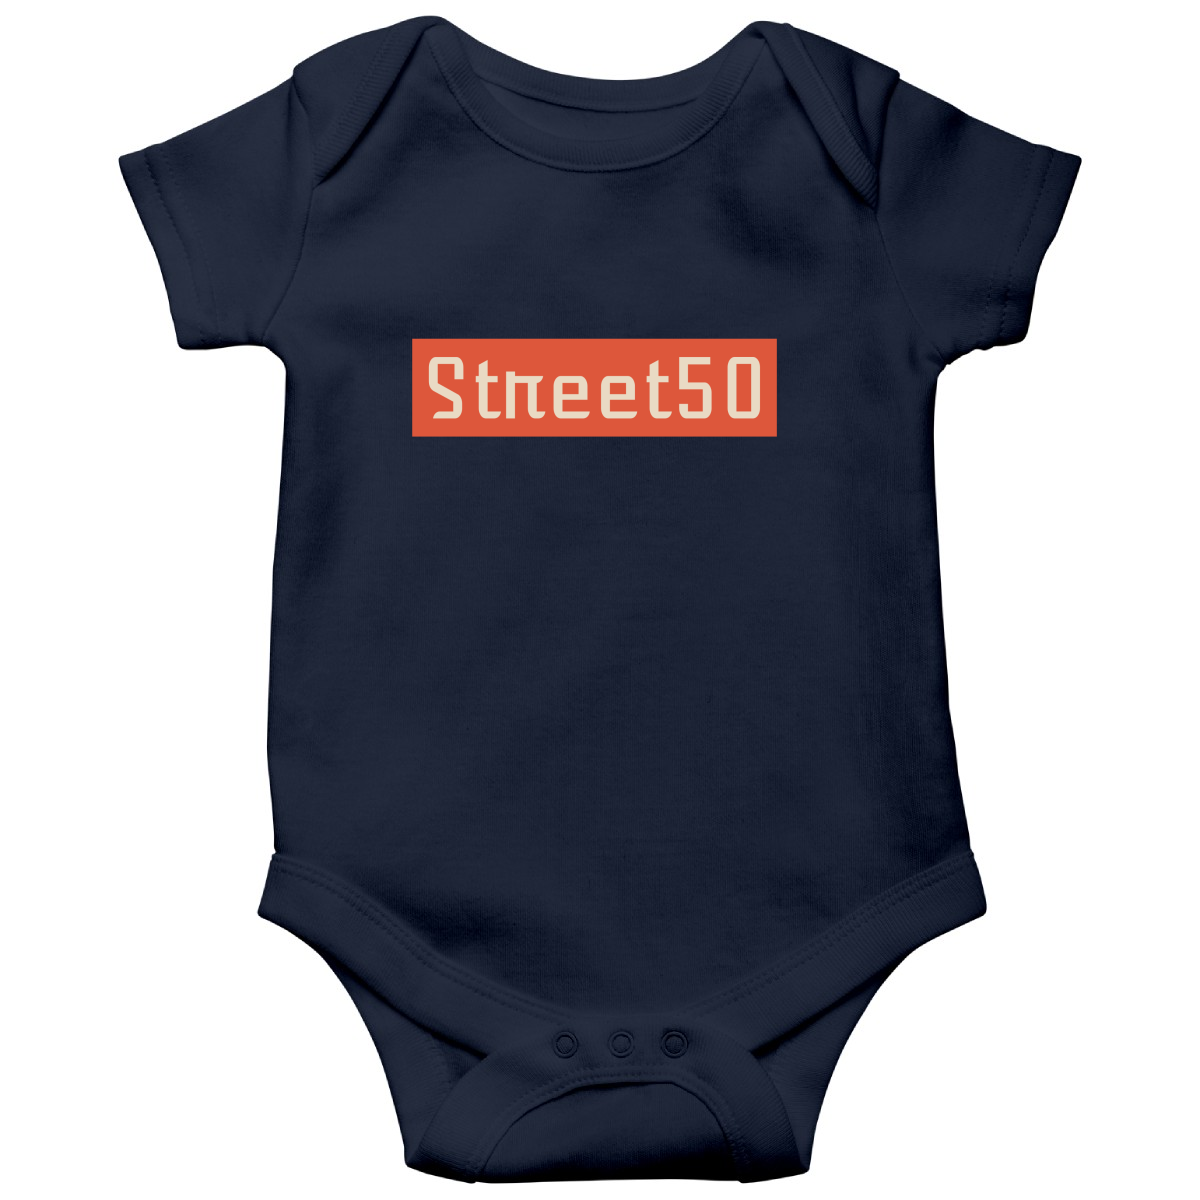 Cool 50 Baby Bodysuits